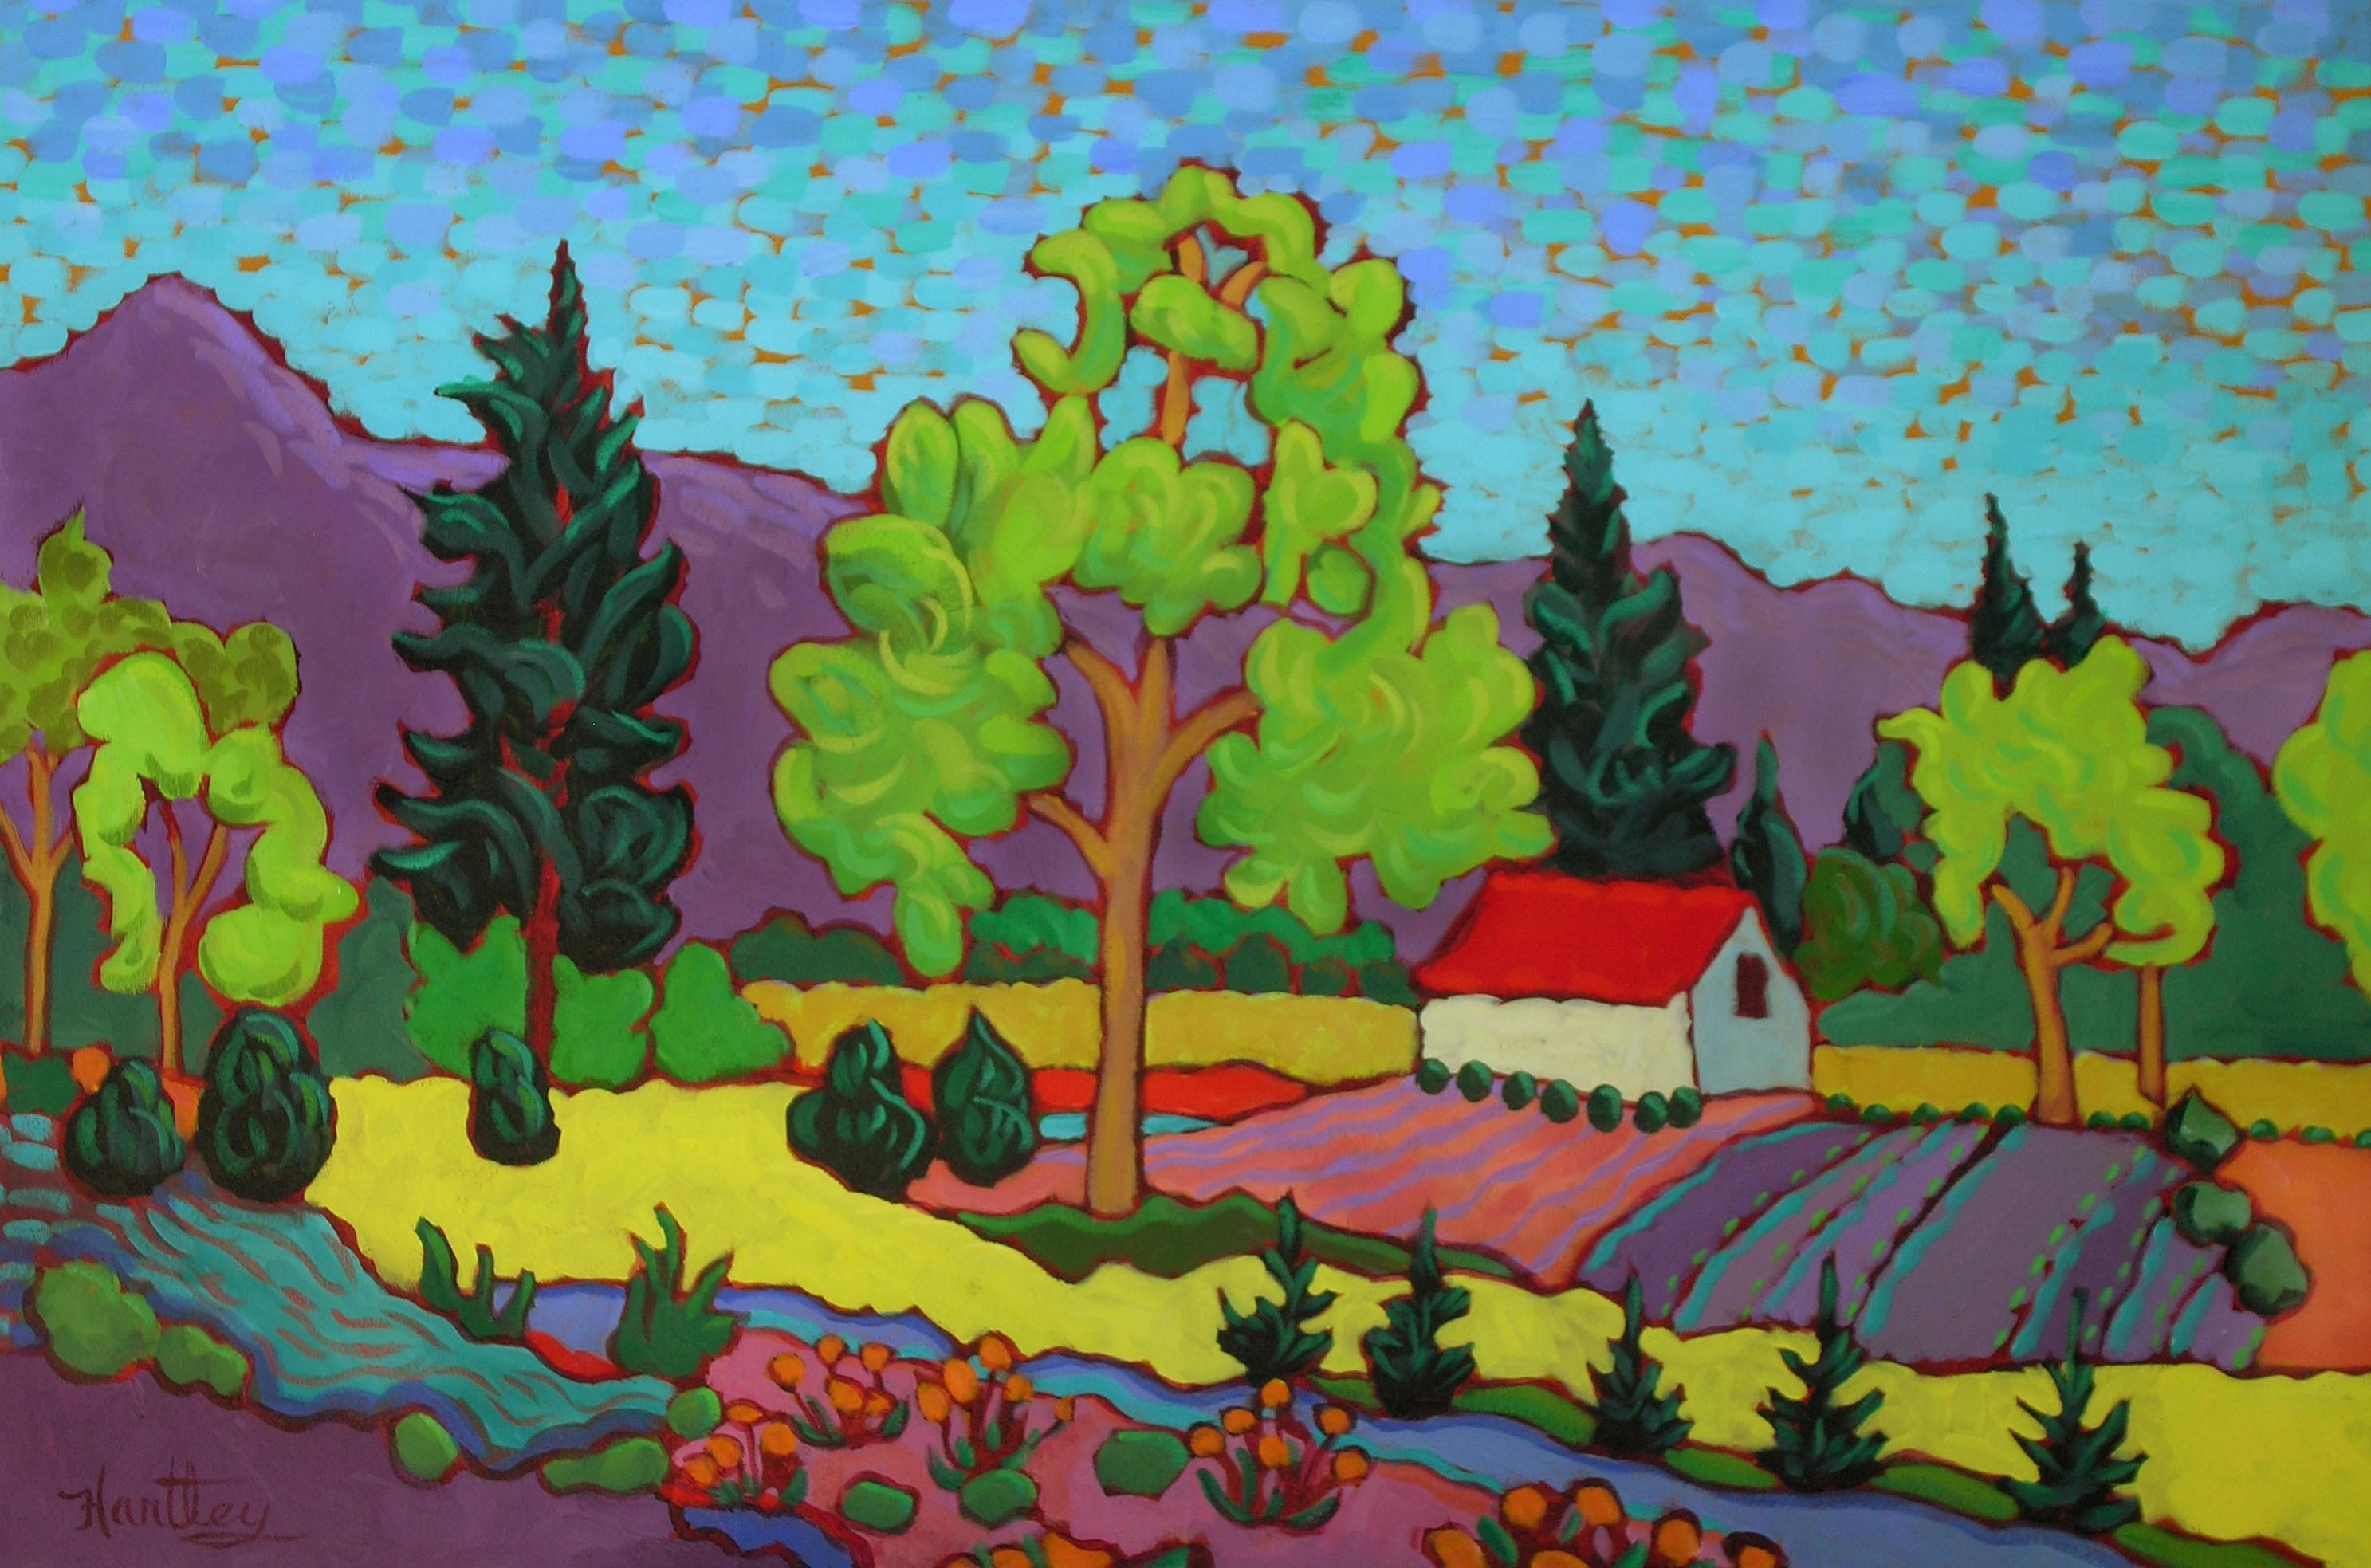 Claudia Hartley Landscape Painting - "Tranquility in Color"